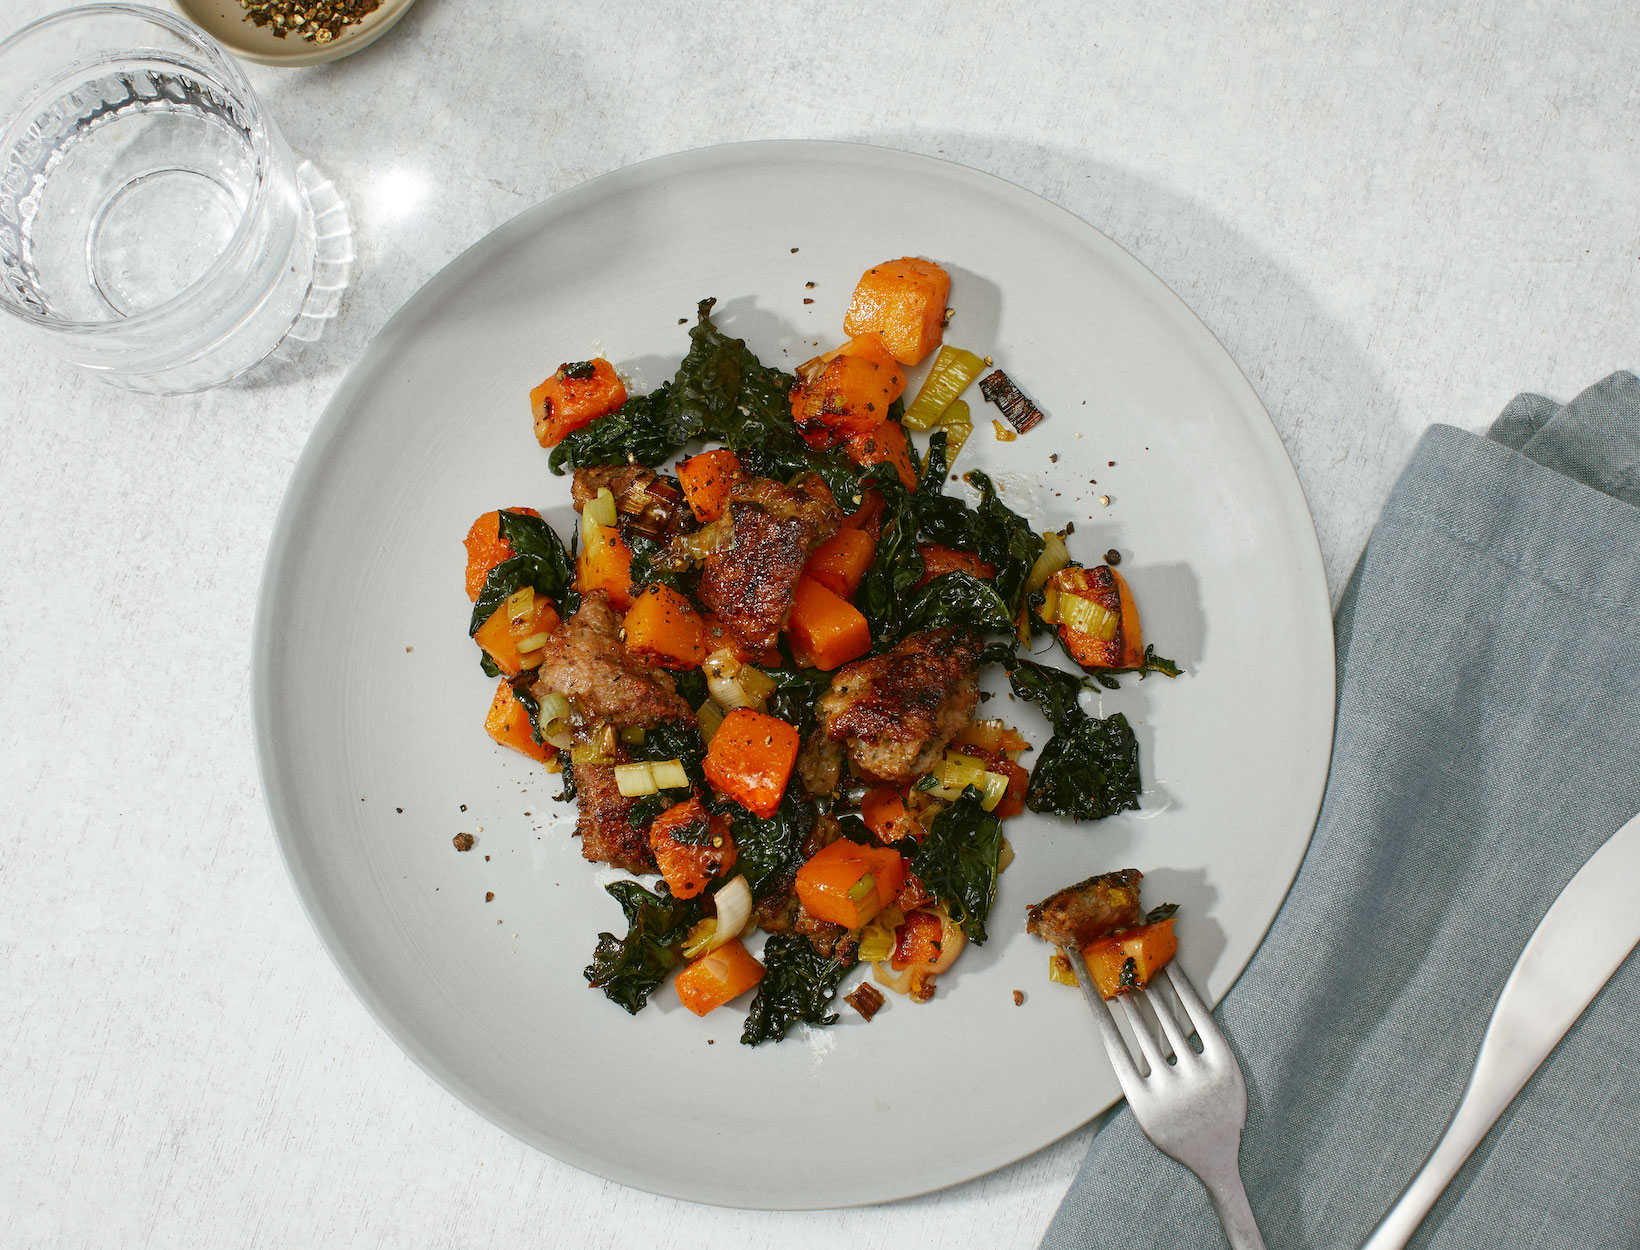 Breakfast-for-Dinner Hash with Turkey Sausage, Butternut Squash, and Kale